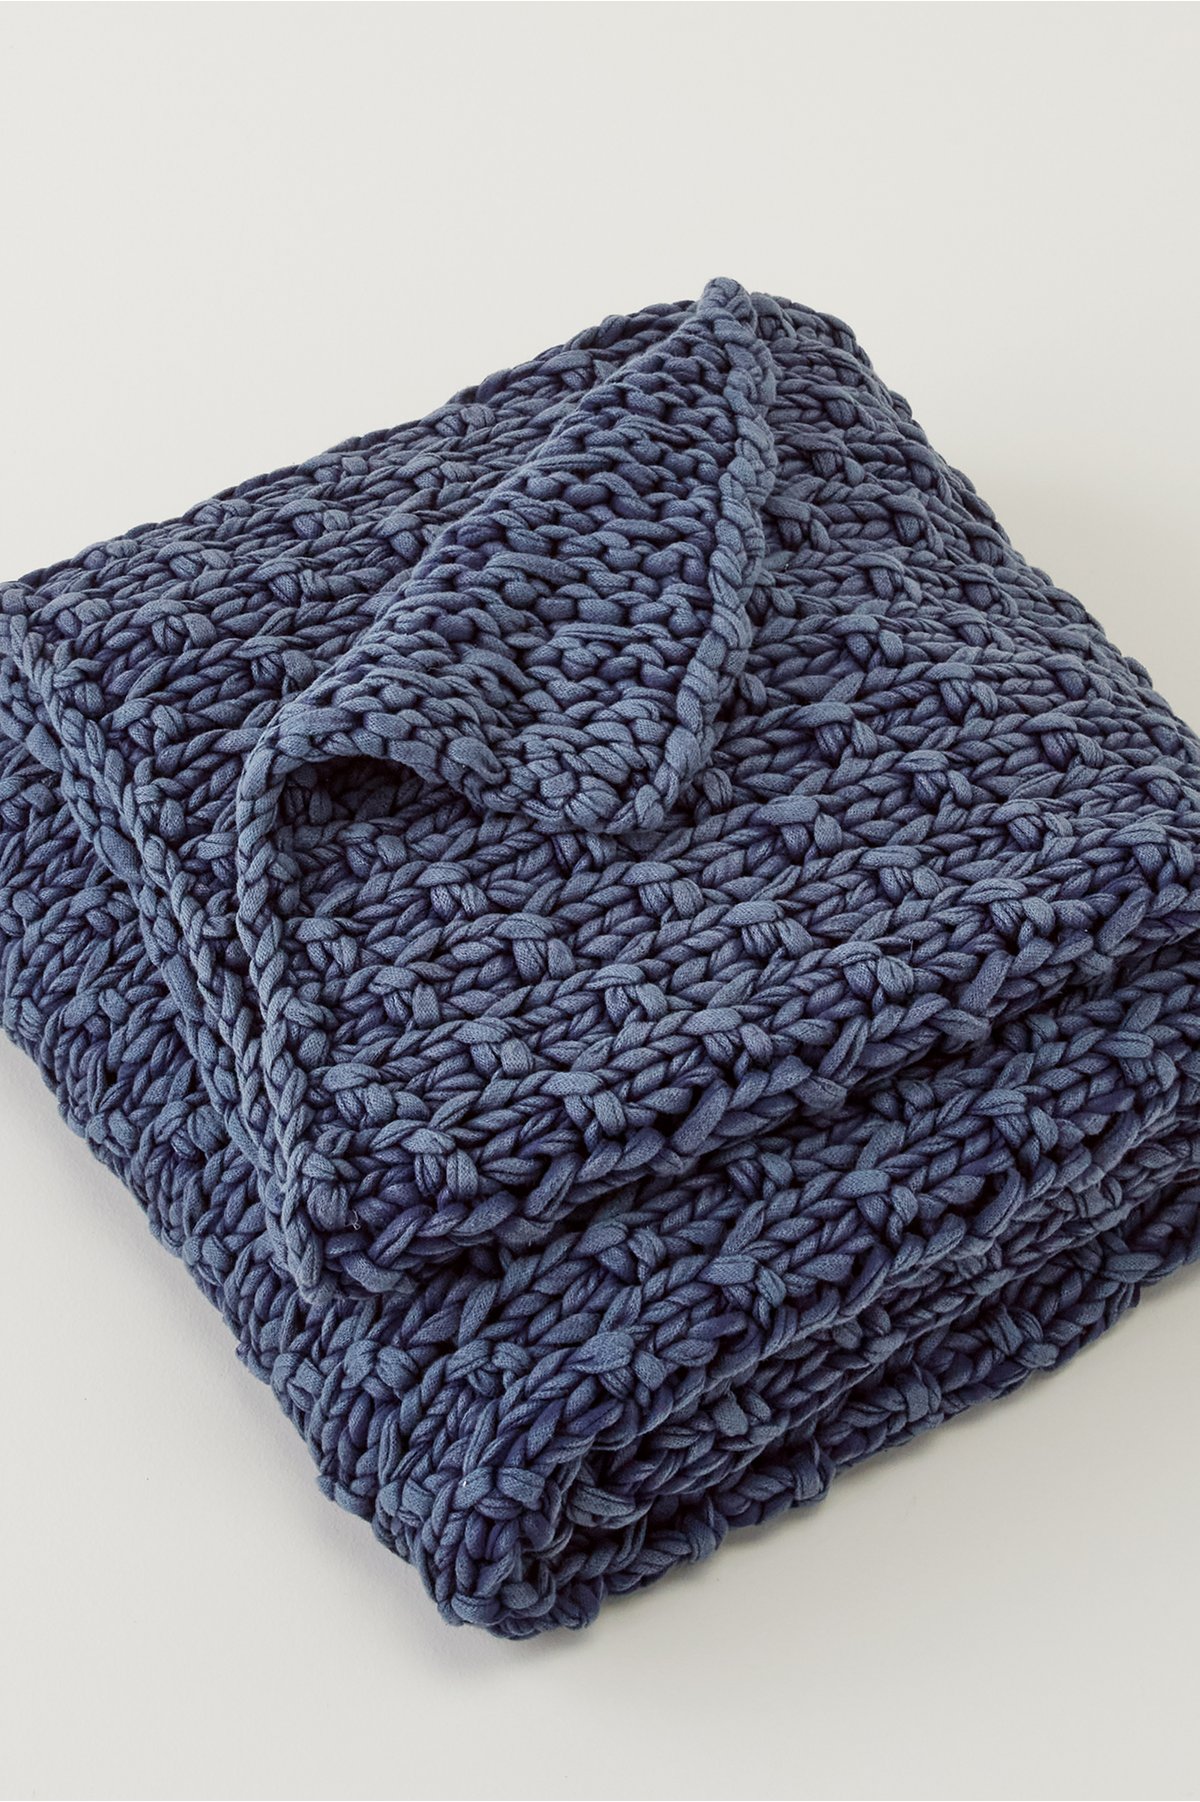 Kali Knit Throw Blanket by Soft Surroundings, in I...